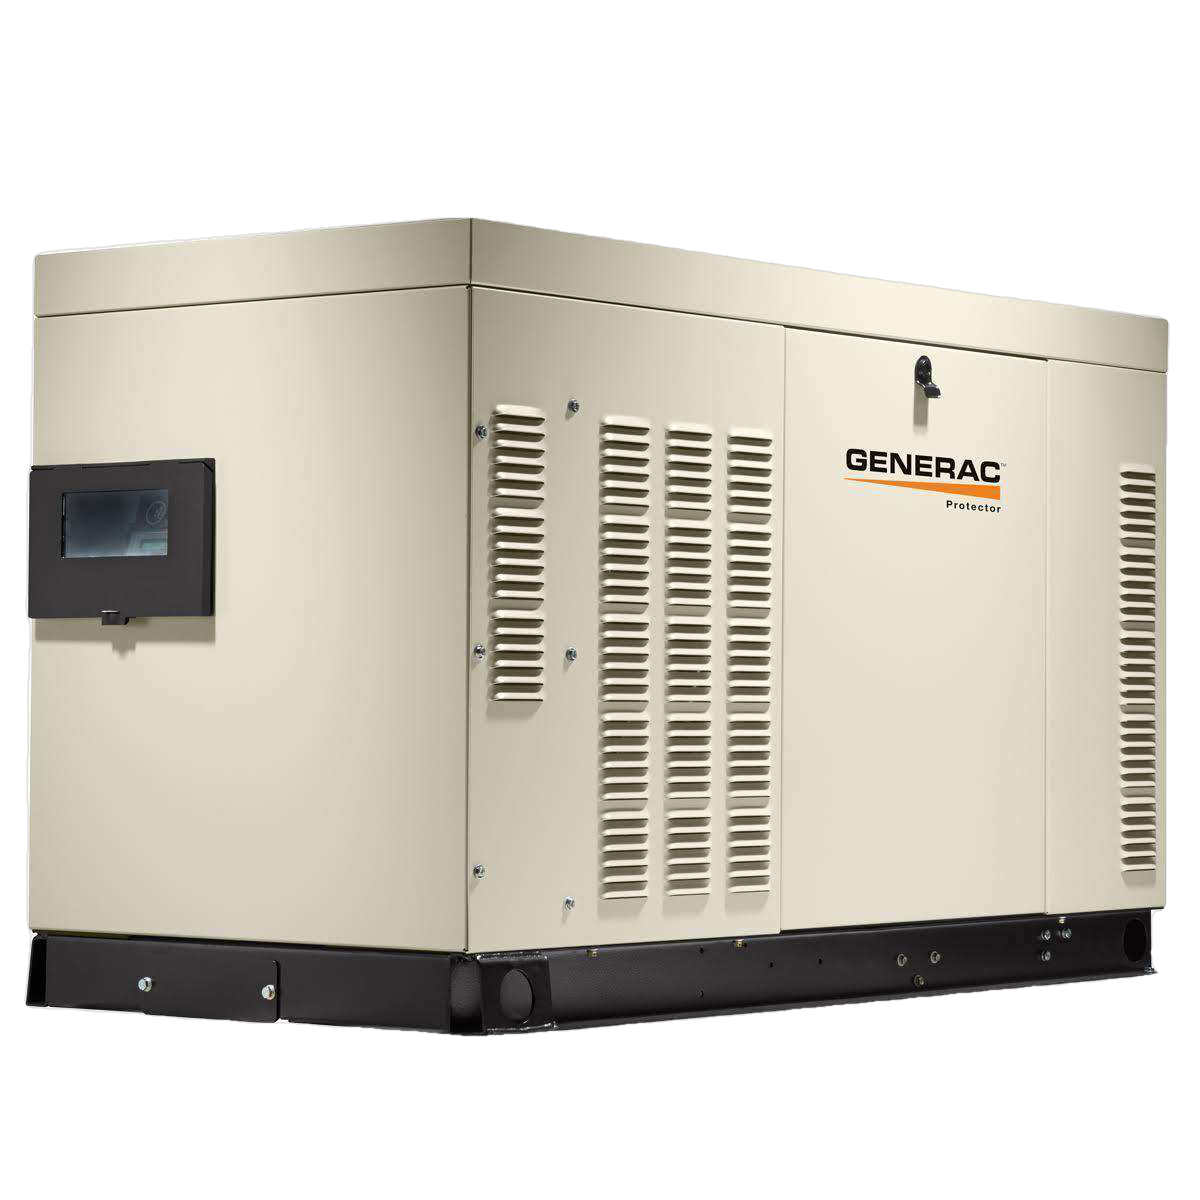 Generac, Generac Protector RG03624ANAX 36kW Liquid Cooled 1 Phase Standby Generator Manufacturer RFB